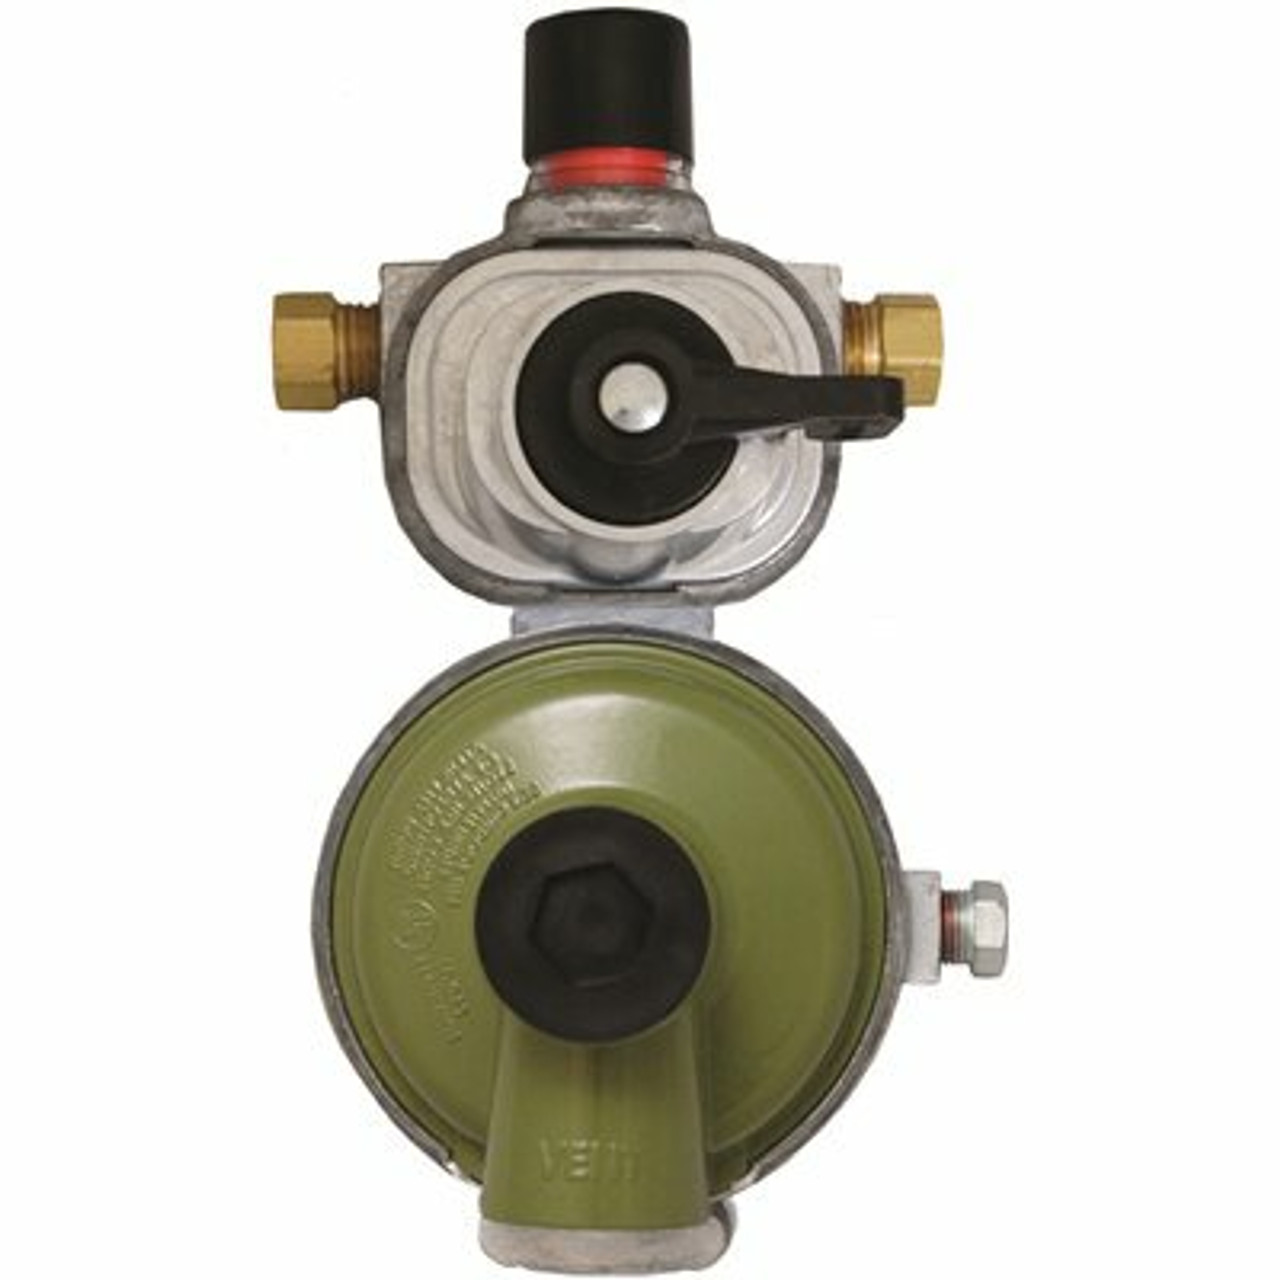 Excela-Flo Automatic Changeover Regulator, High Capacity, 2 Stage, 1/4 In. Inverted Flare X 3/8 In. Fnpt